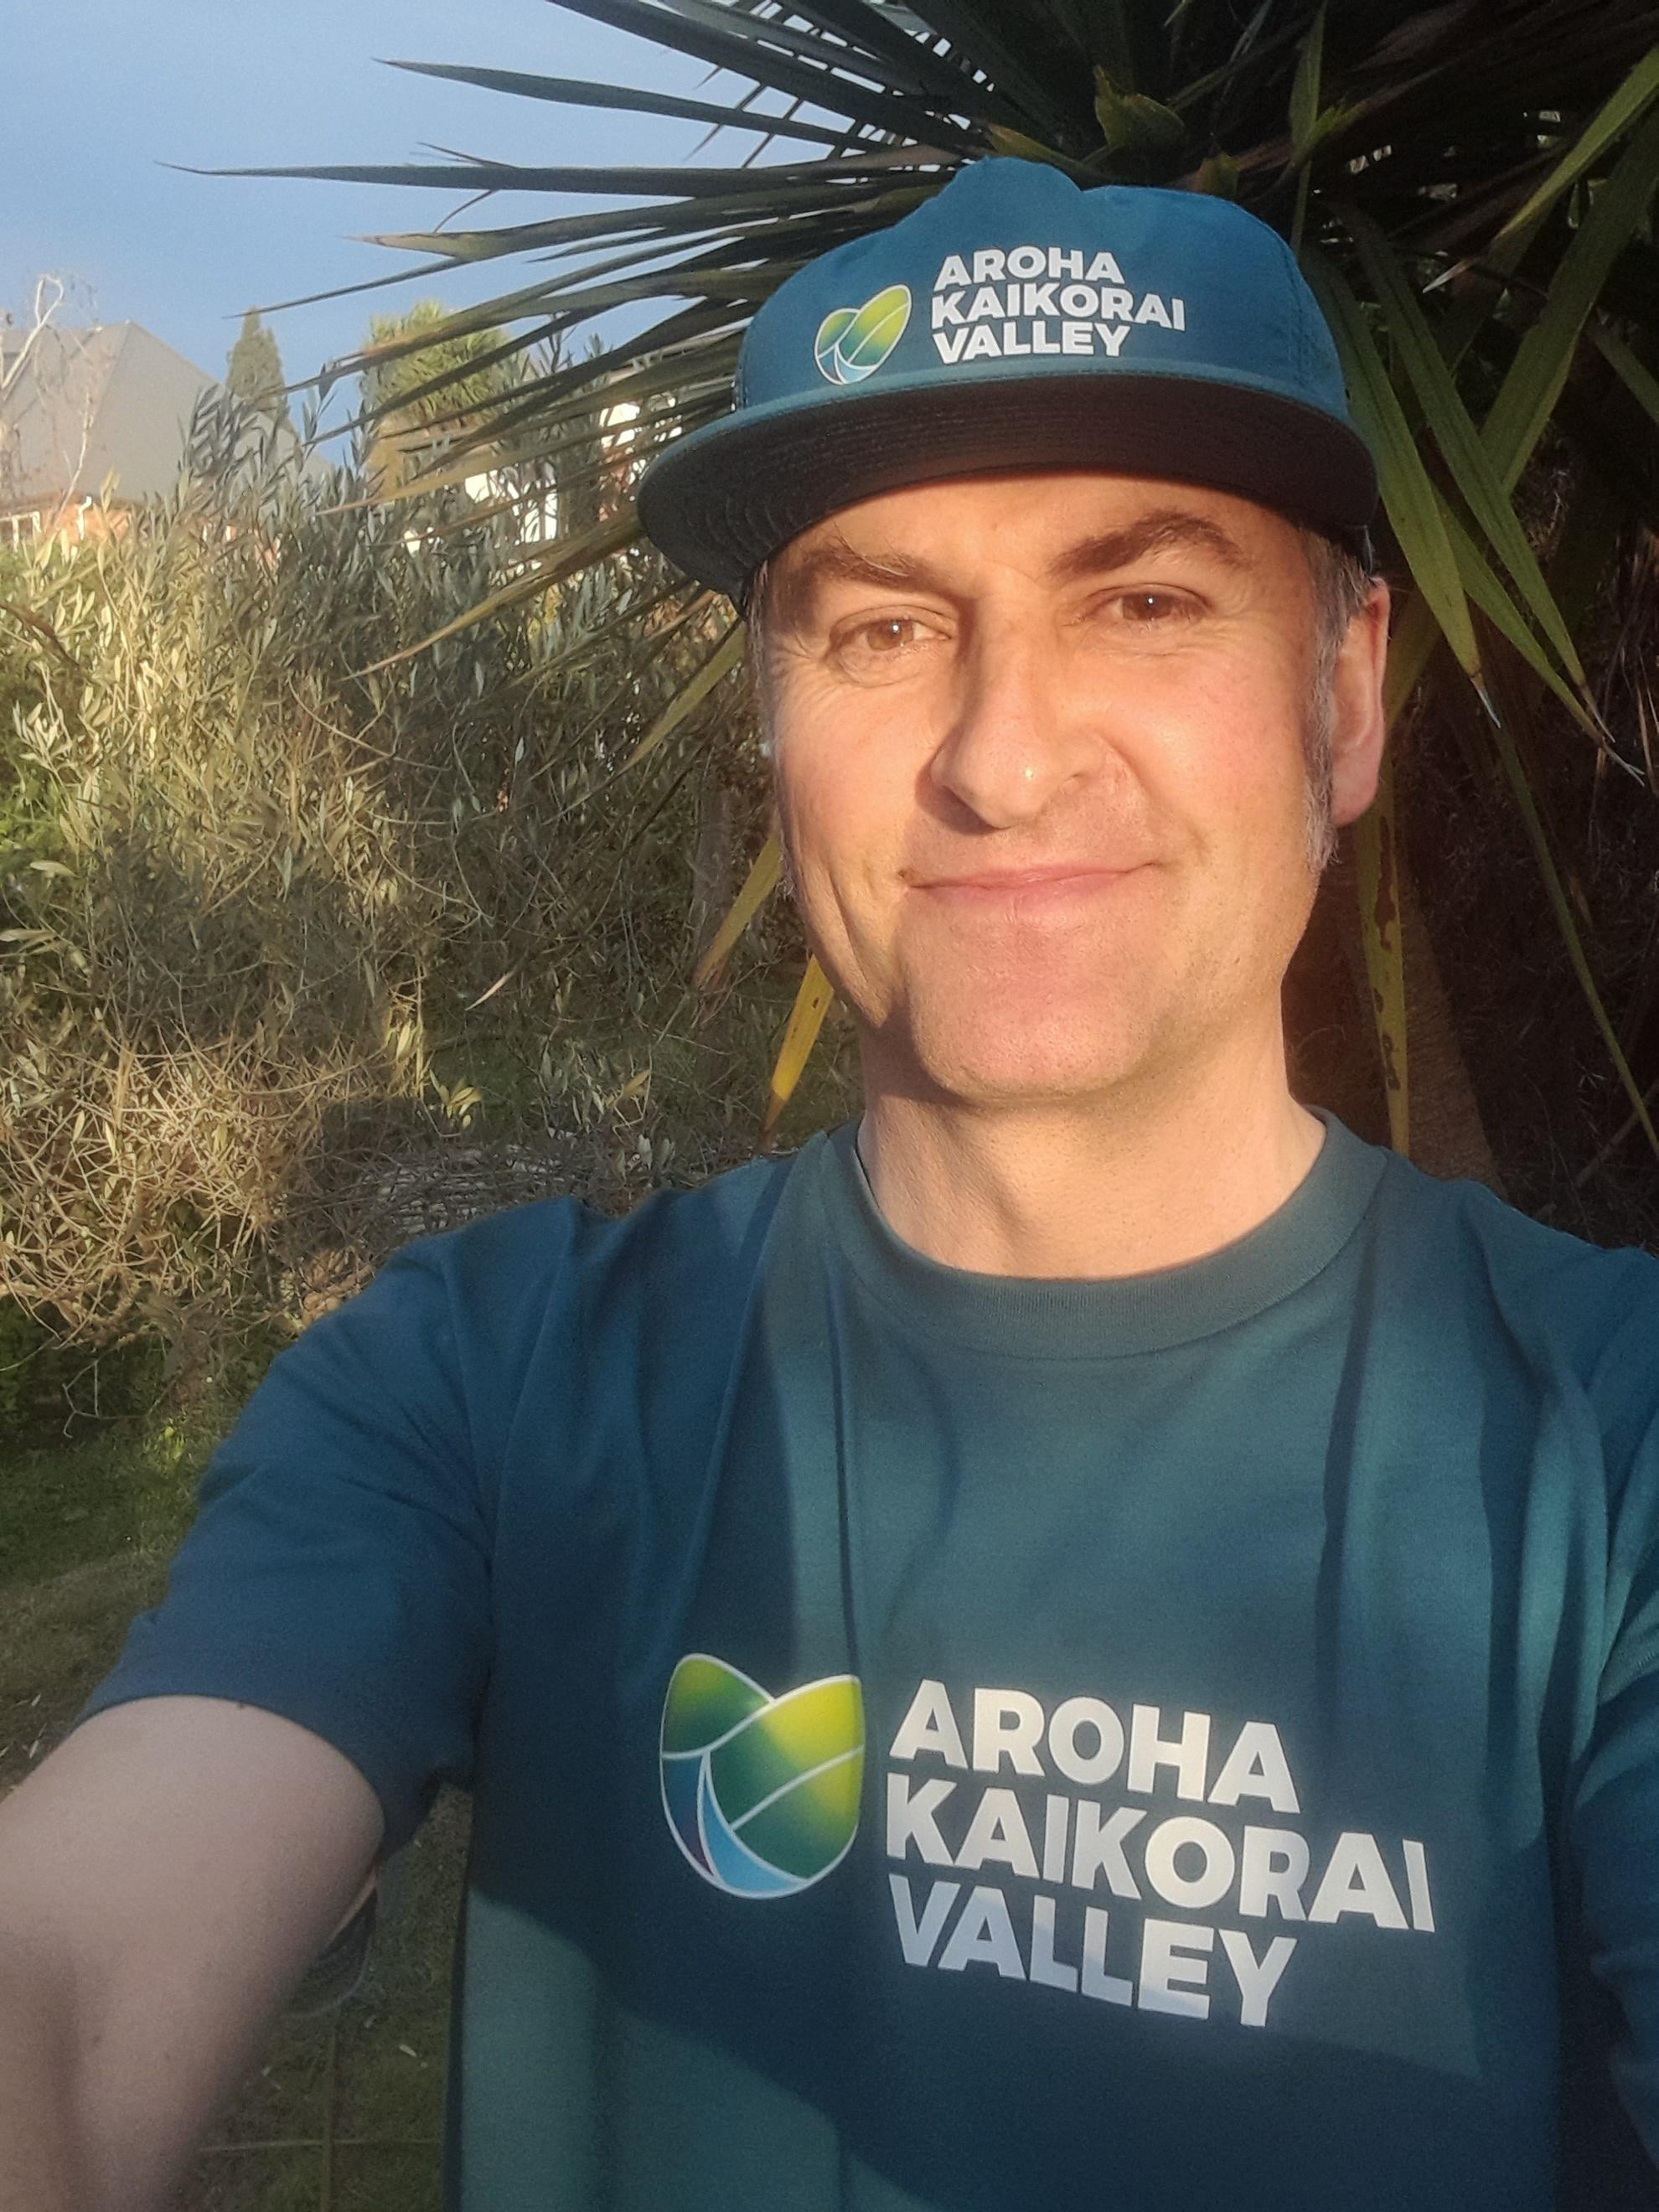 City Walks owner/ guide Athol Parks, proud to support Aroha Kaikorai Valley.